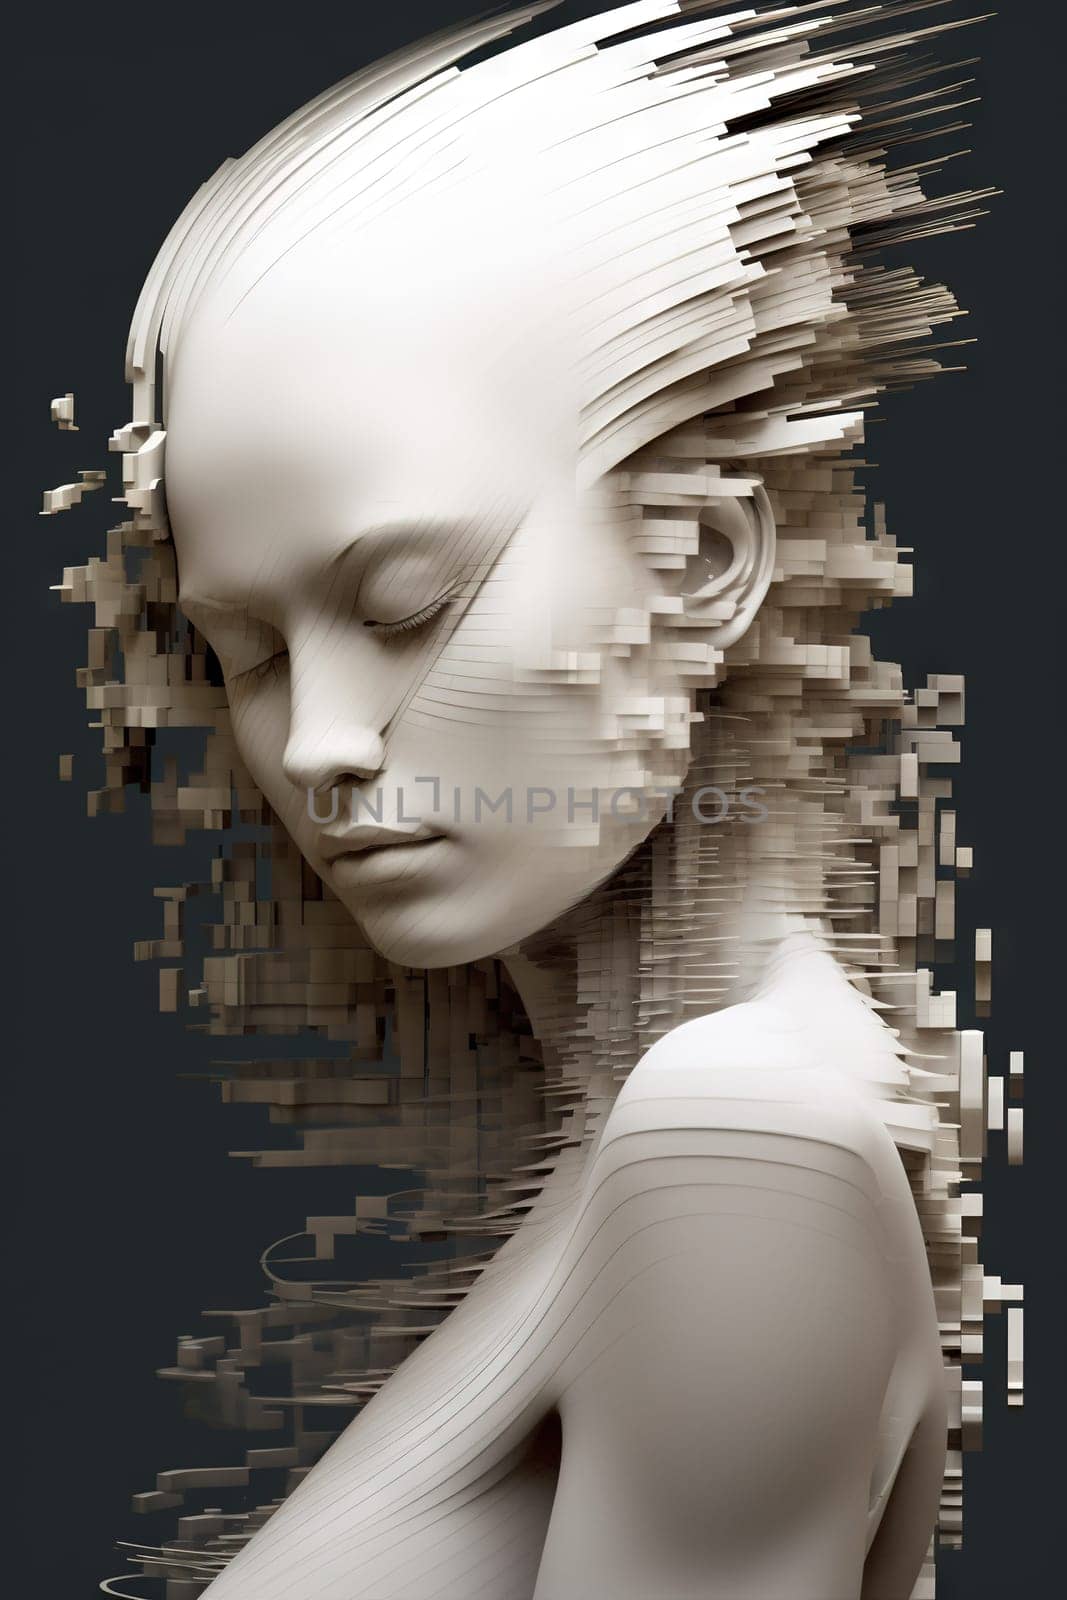 Pixelated woman portrait in white and grey tones - generative AI - AI generated